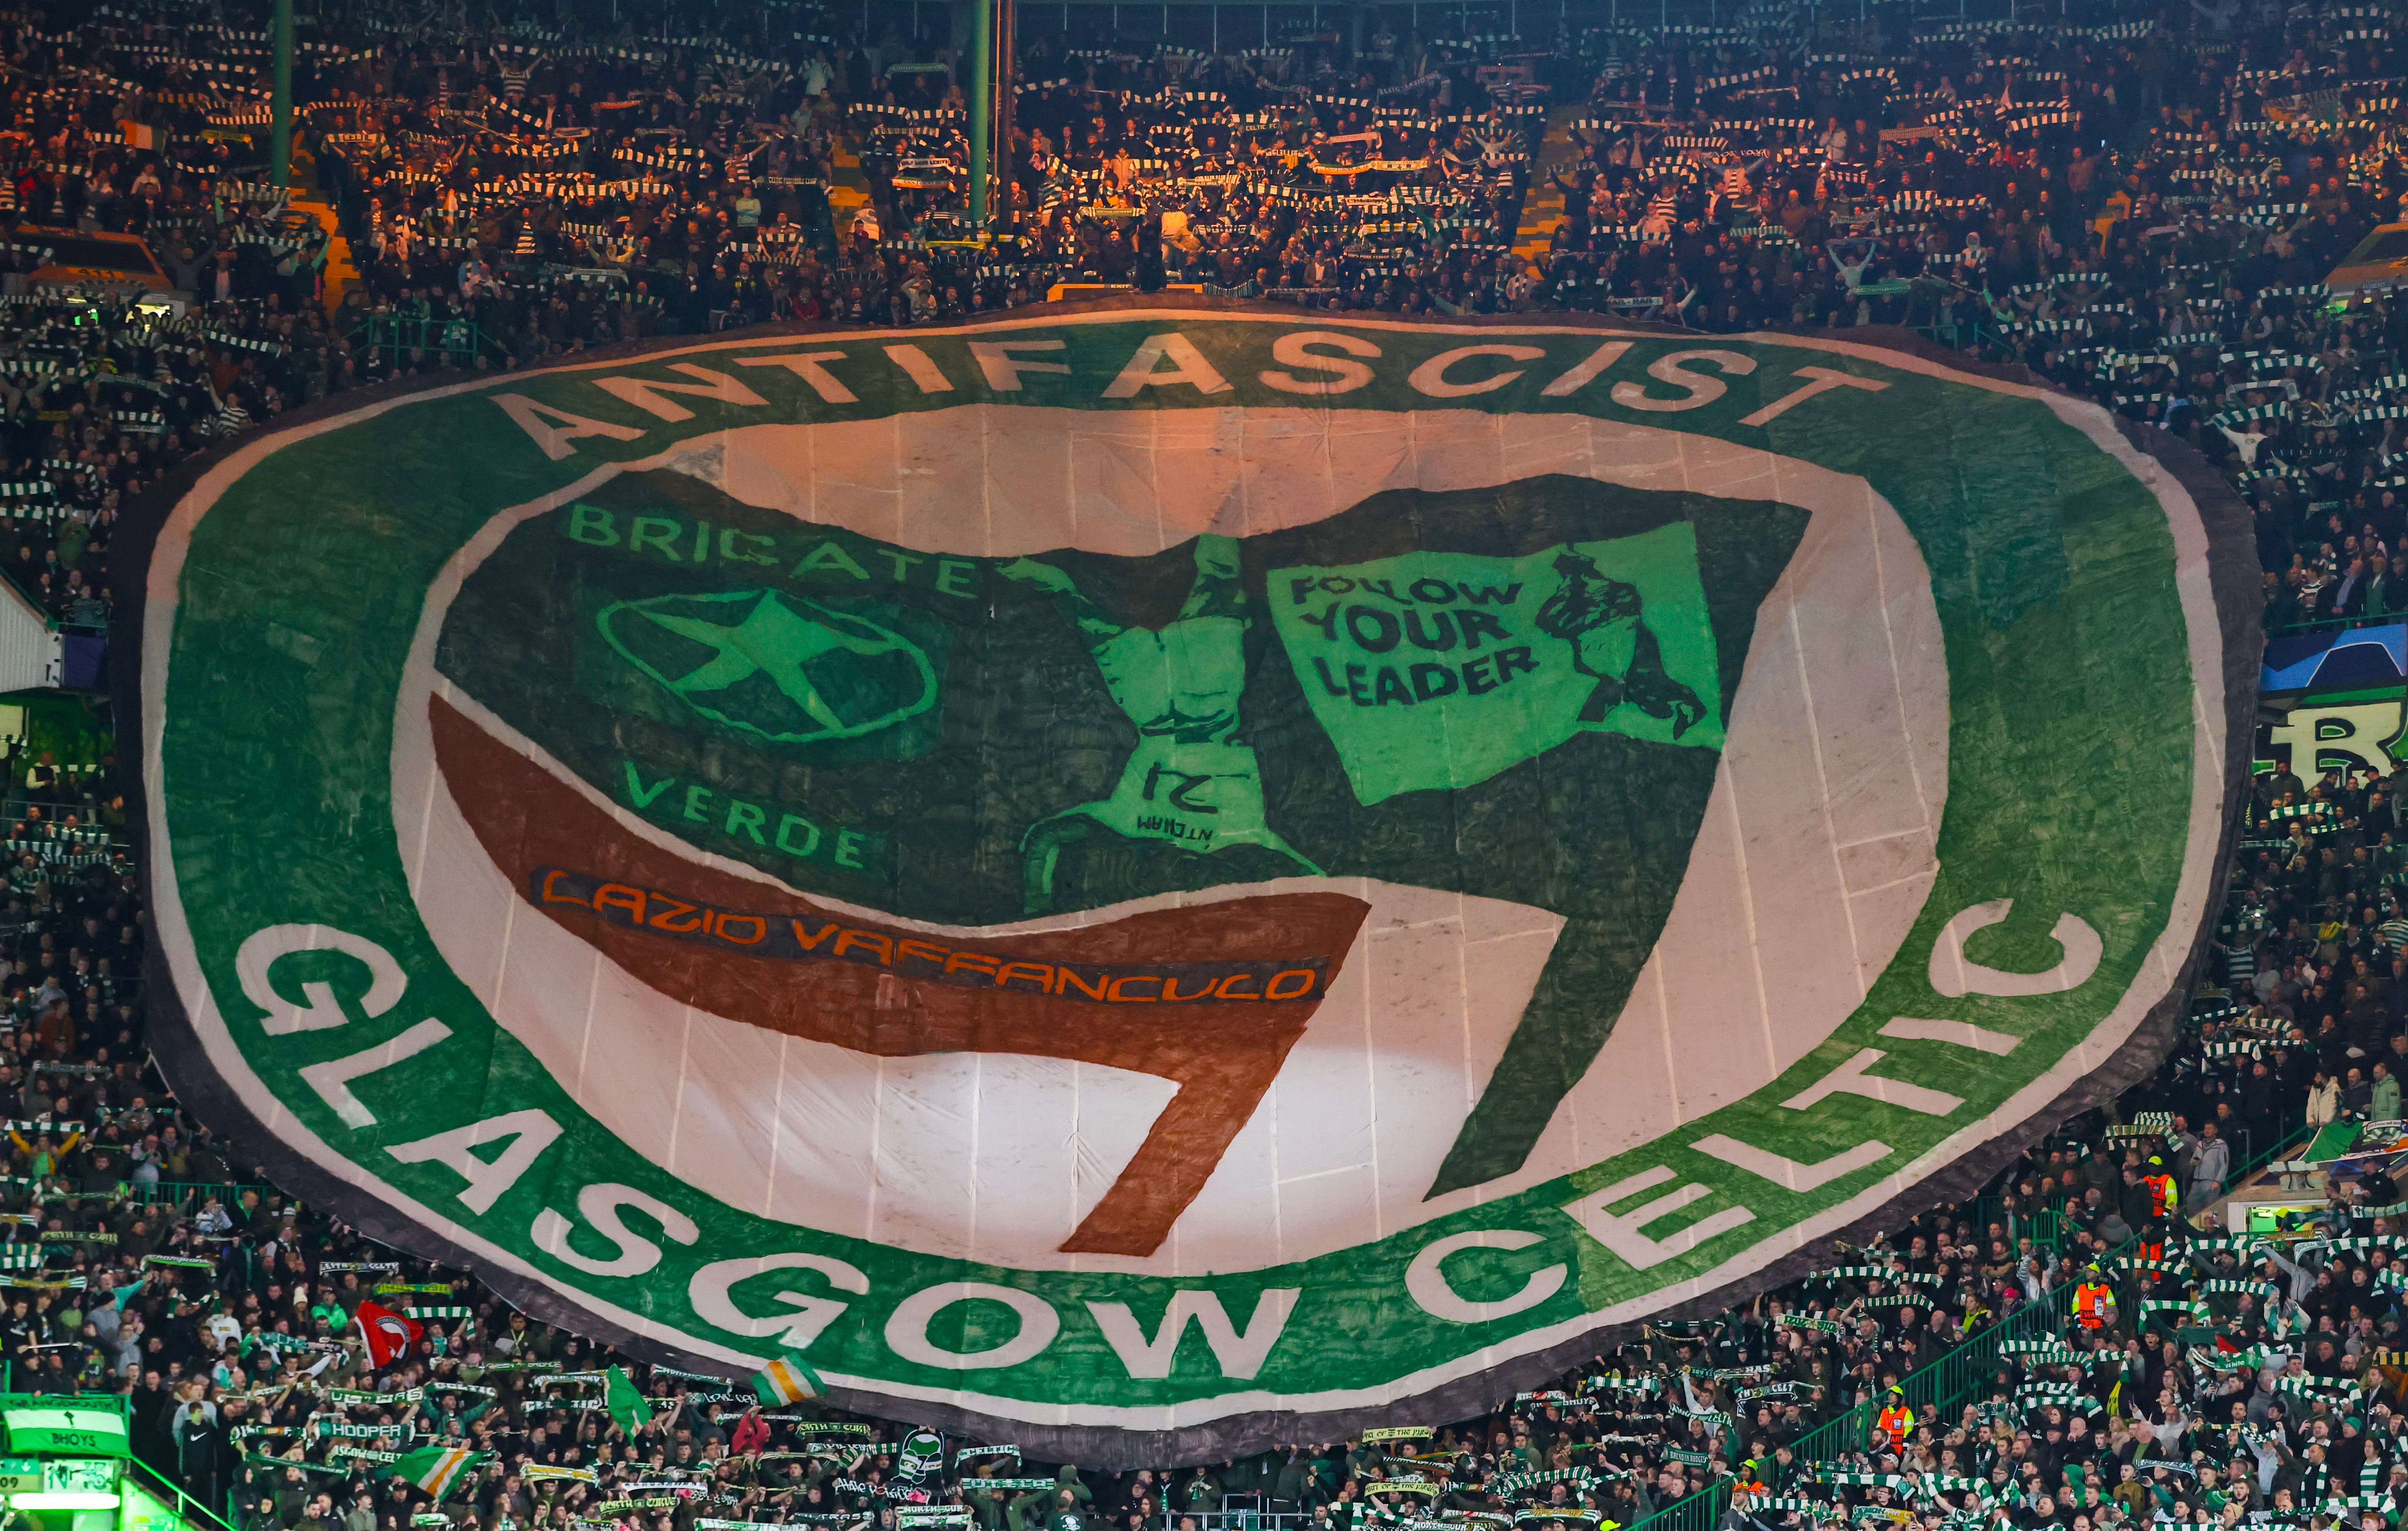 Celtic were fined by UEFA for the banner unveiled in their Champions League game against Lazio.